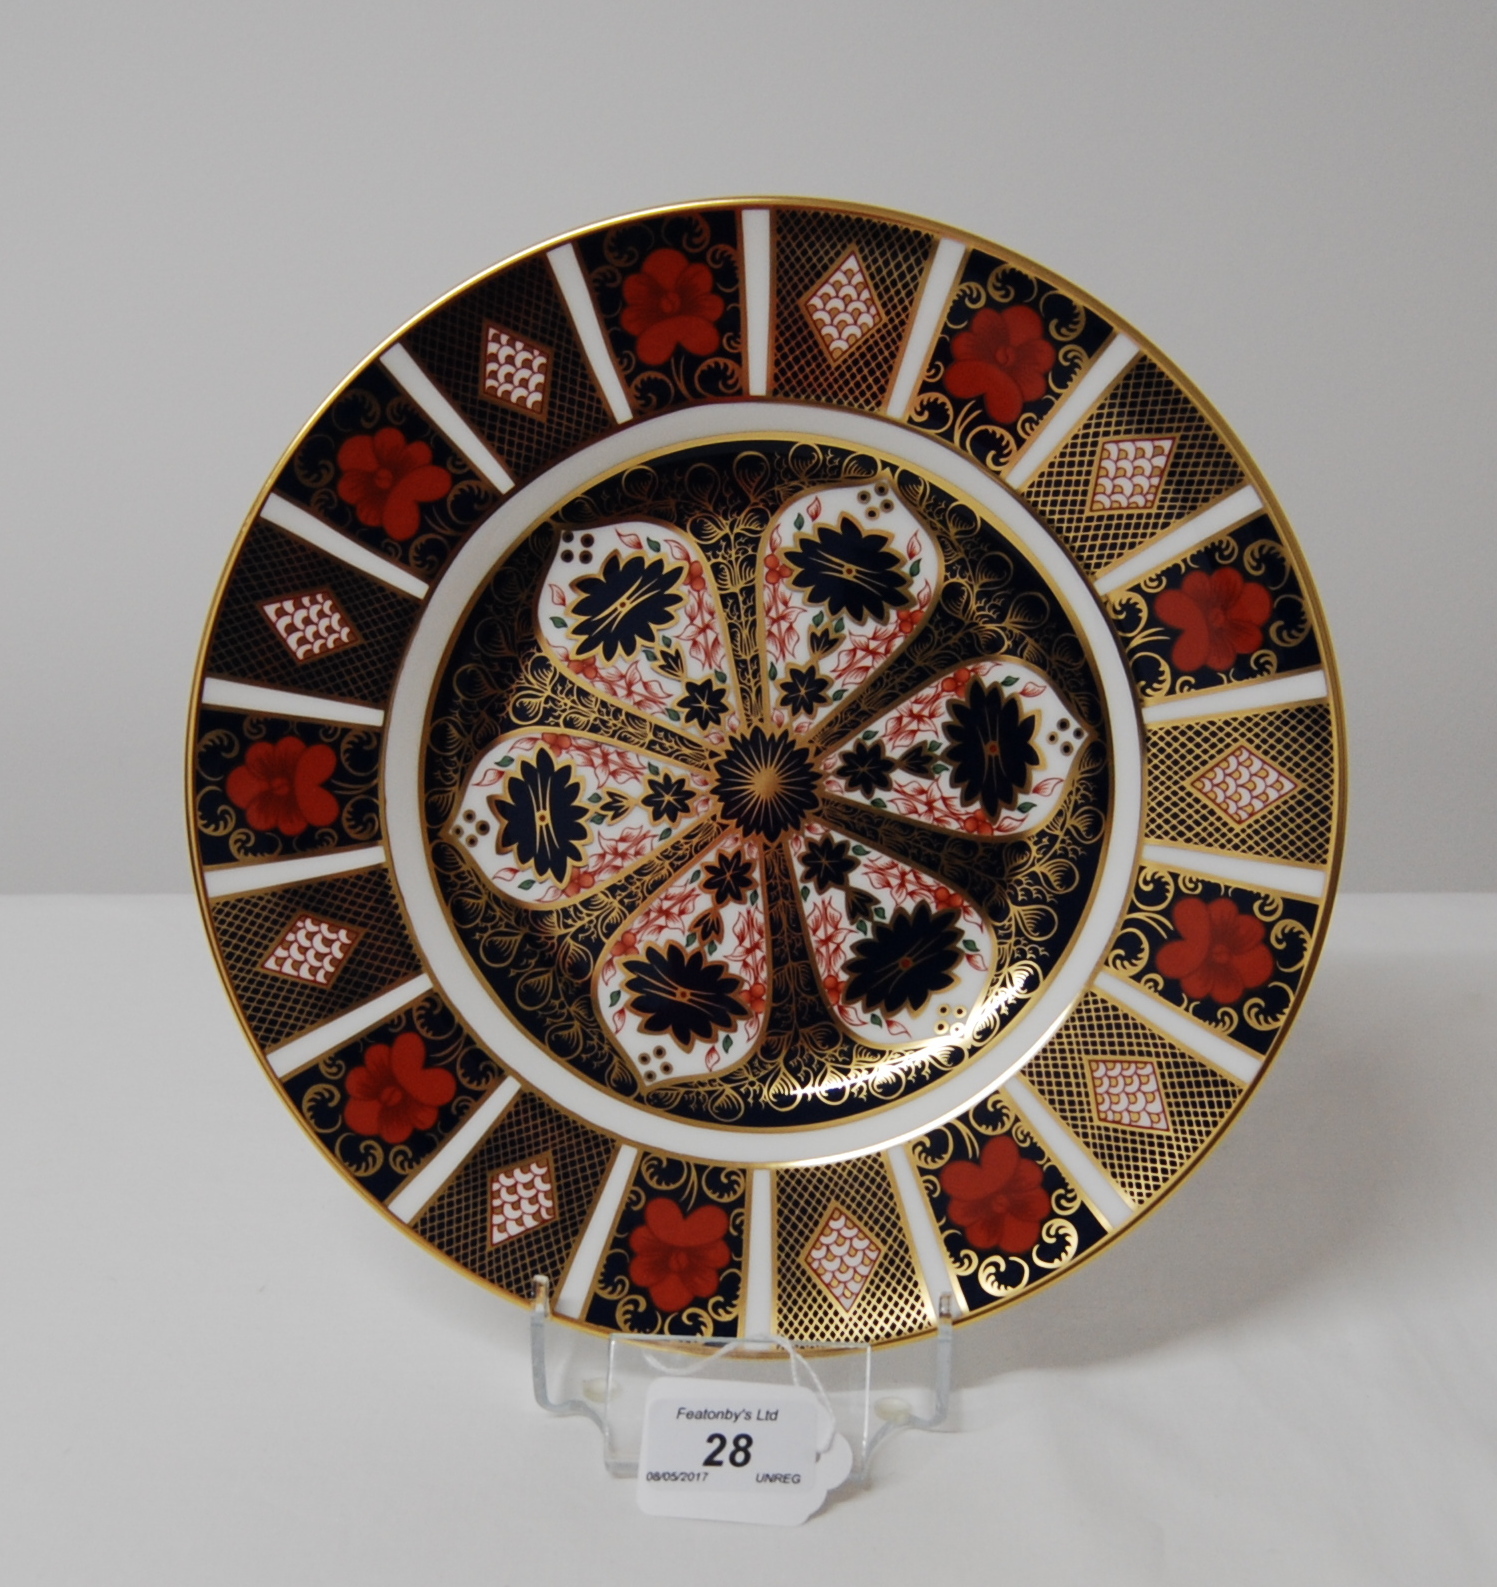 FIRST QUALITY ROYAL CROWN DERBY OLD IMARI NO.1128 PLATE, DATE CODE MMVIII (2008) 27CM DIAMETER.